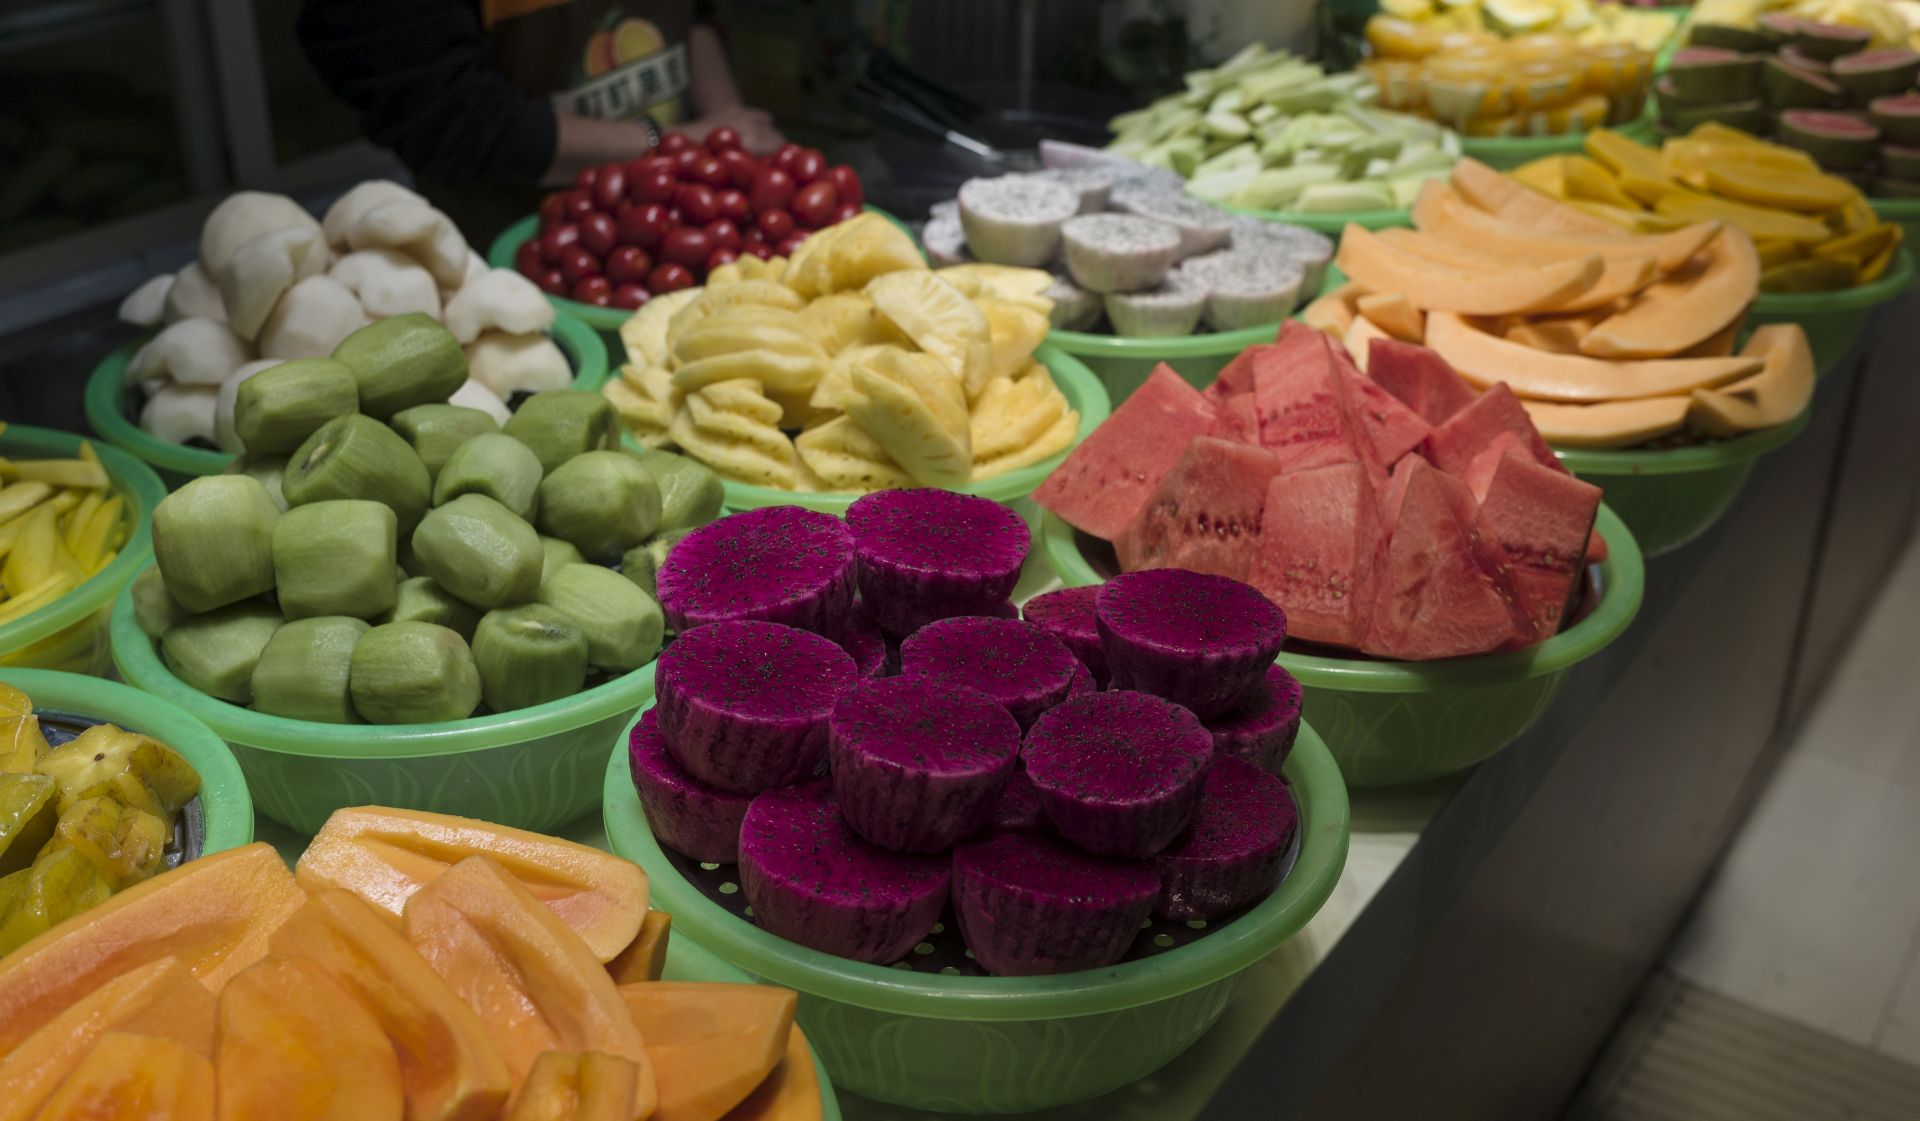 epa07357501 Cut fruits are on sale at a stall in a street food market in the Dongmen area of Shenzhen, Guangdong Province, China, 09 February 2019 (issued 10 February 2019). Dongmen is a shopping area and subdistrict within Luohu District and one of the oldest part of the city. The street food market is popular with locals and visitors alike.  EPA/STR